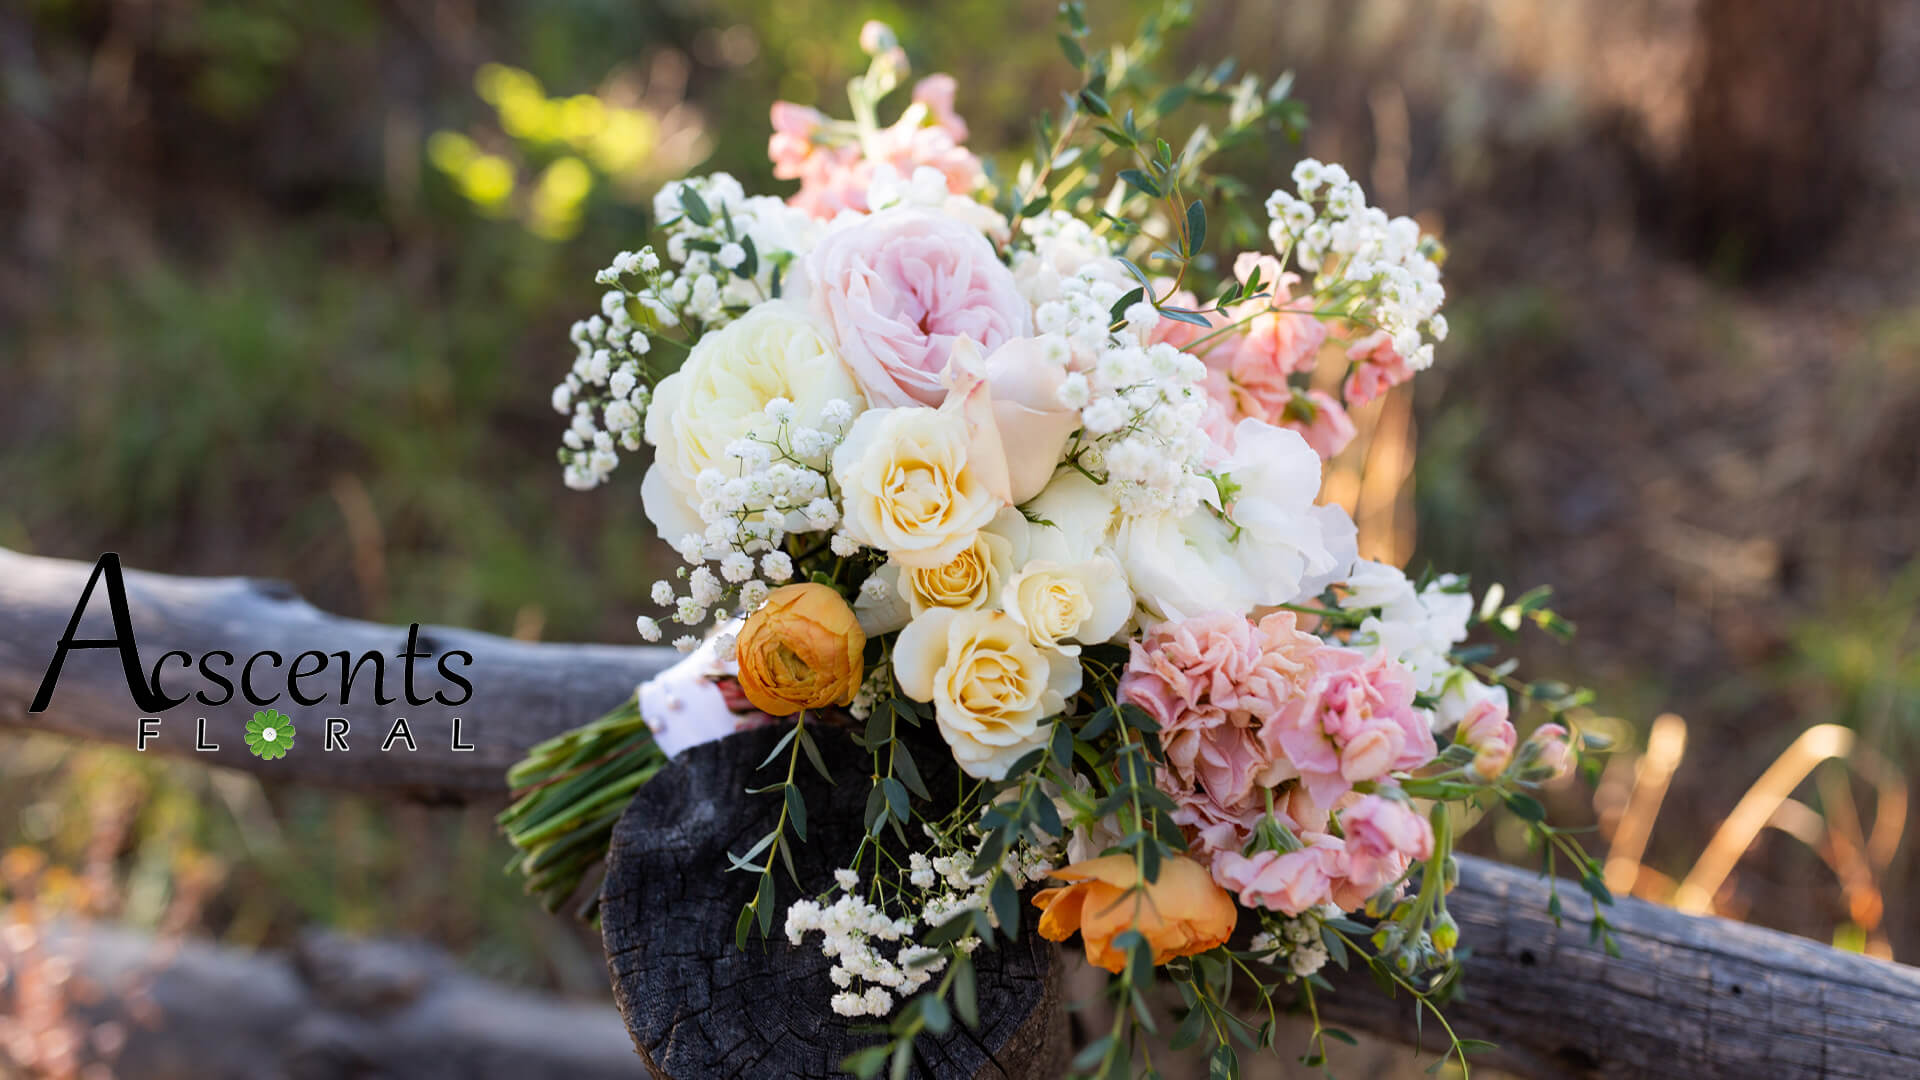 A wedding bouquet with white, yellow. and pink flowers. The Ascents Floral logo is on the middle left side